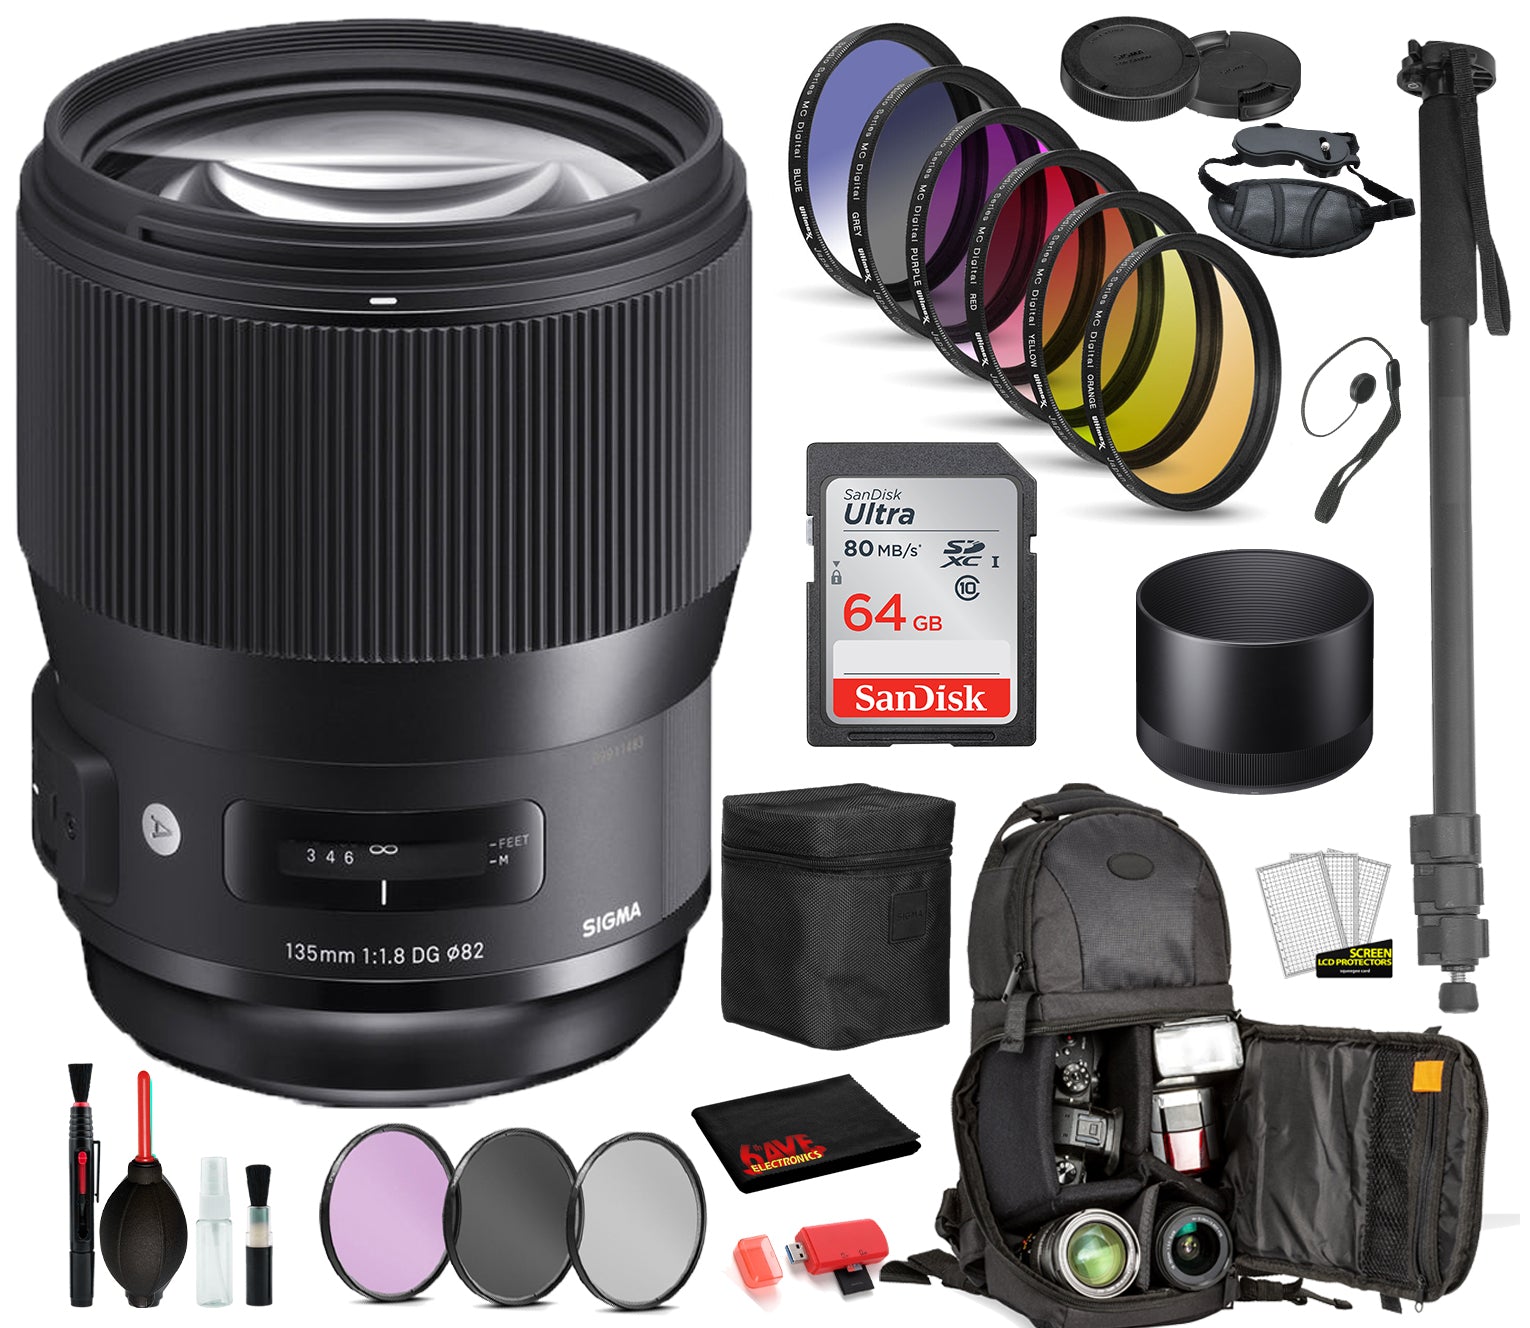 Sigma 135mm f/1.8 DG HSM Art Lens for Canon EF with Bundle Includes: Sandisk 64gb SD Card, 9PC Filter Kit + More